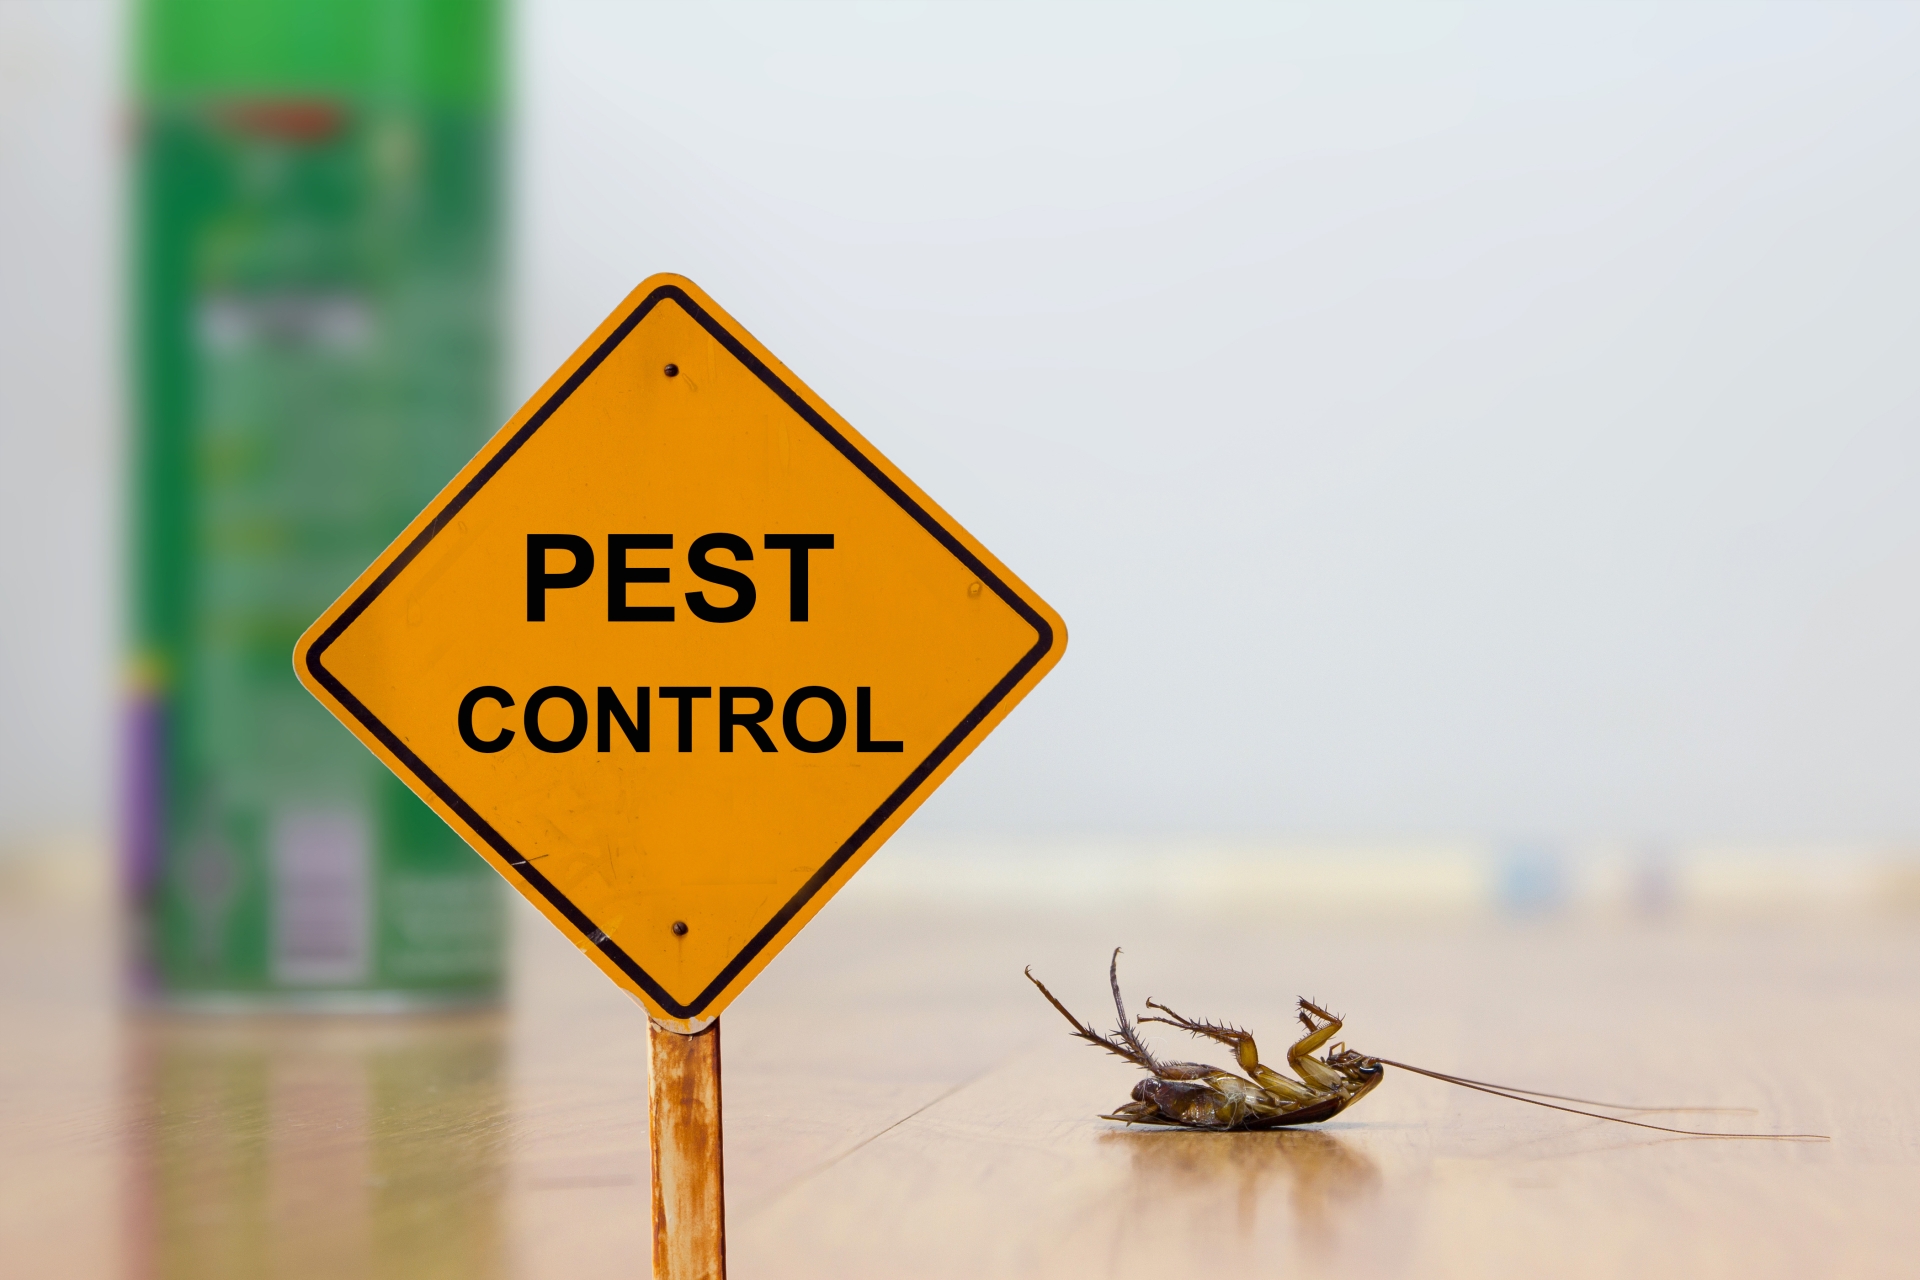 24 Hour Pest Control, Pest Control in Swanley, Hextable, Crockenhill, BR8. Call Now 020 8166 9746